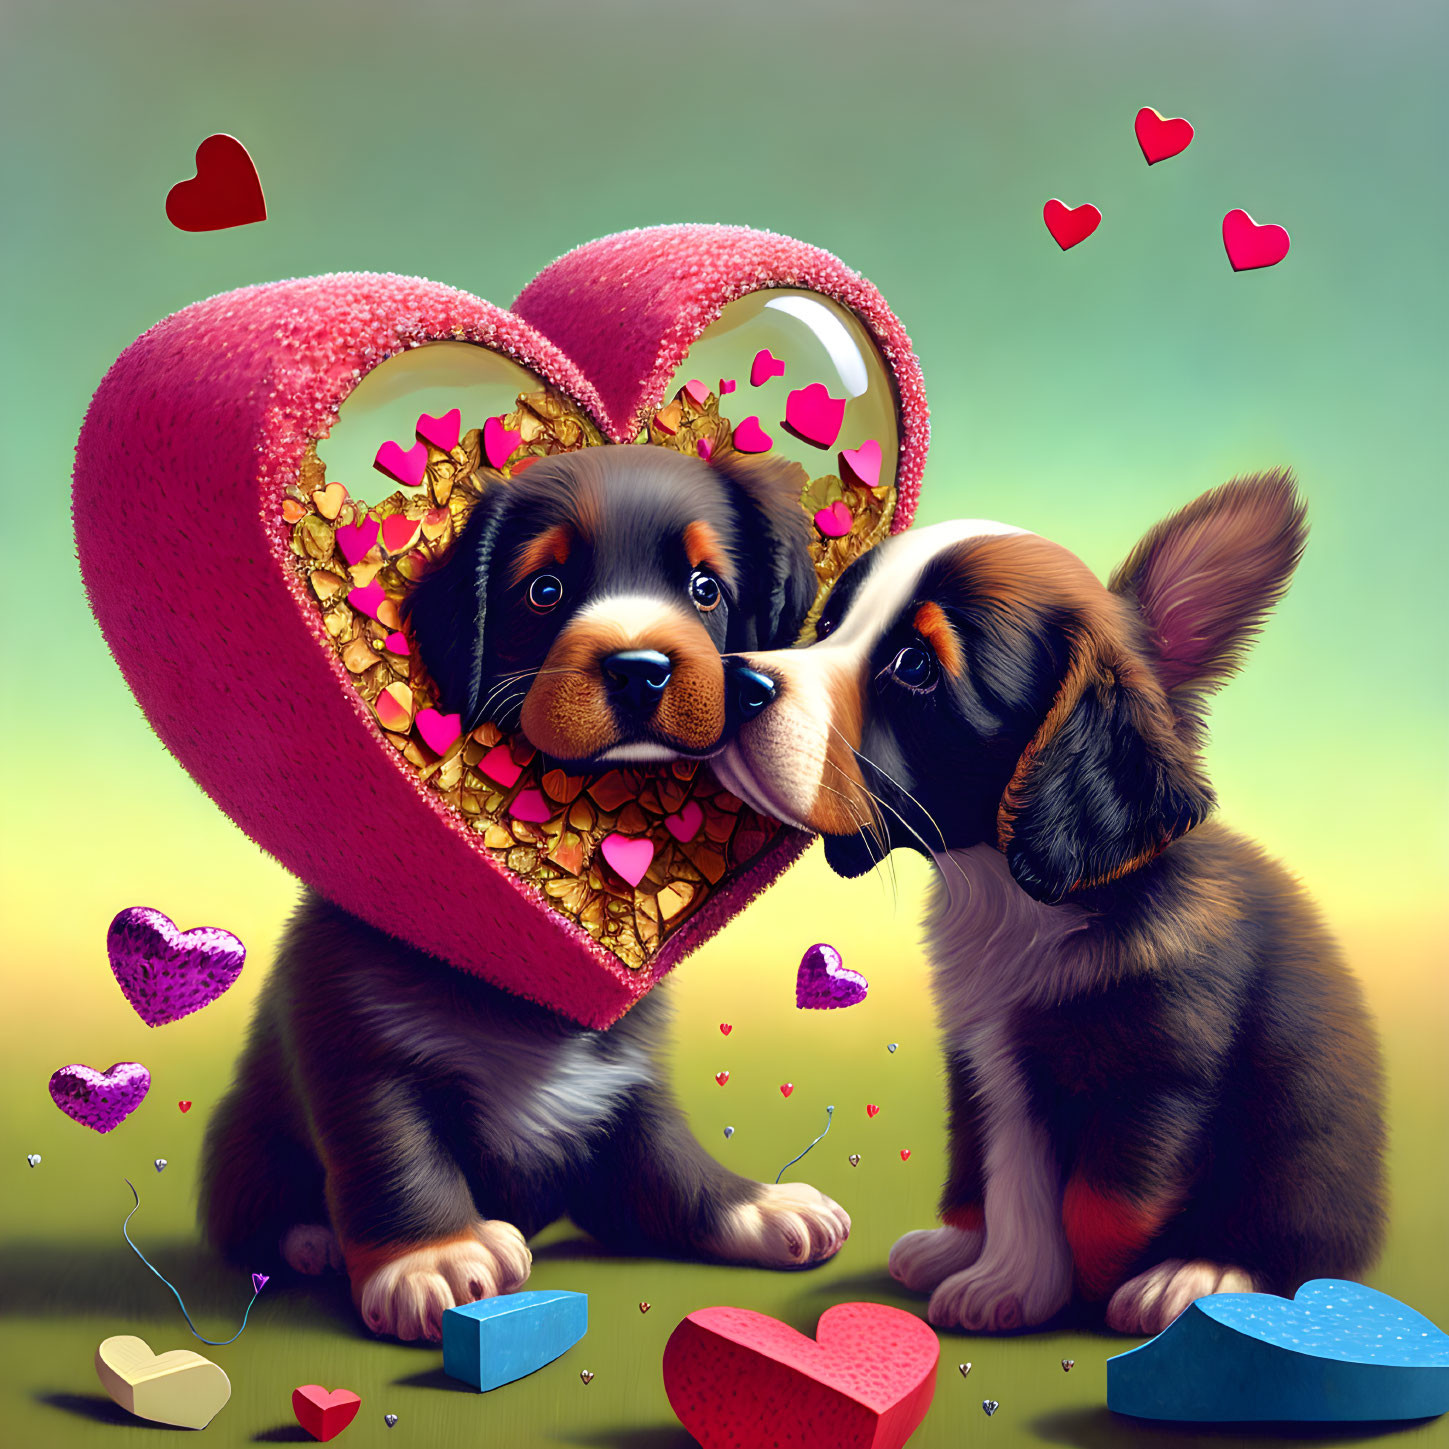 Two cute puppies with heart-shaped object and love decorations under gradient sky